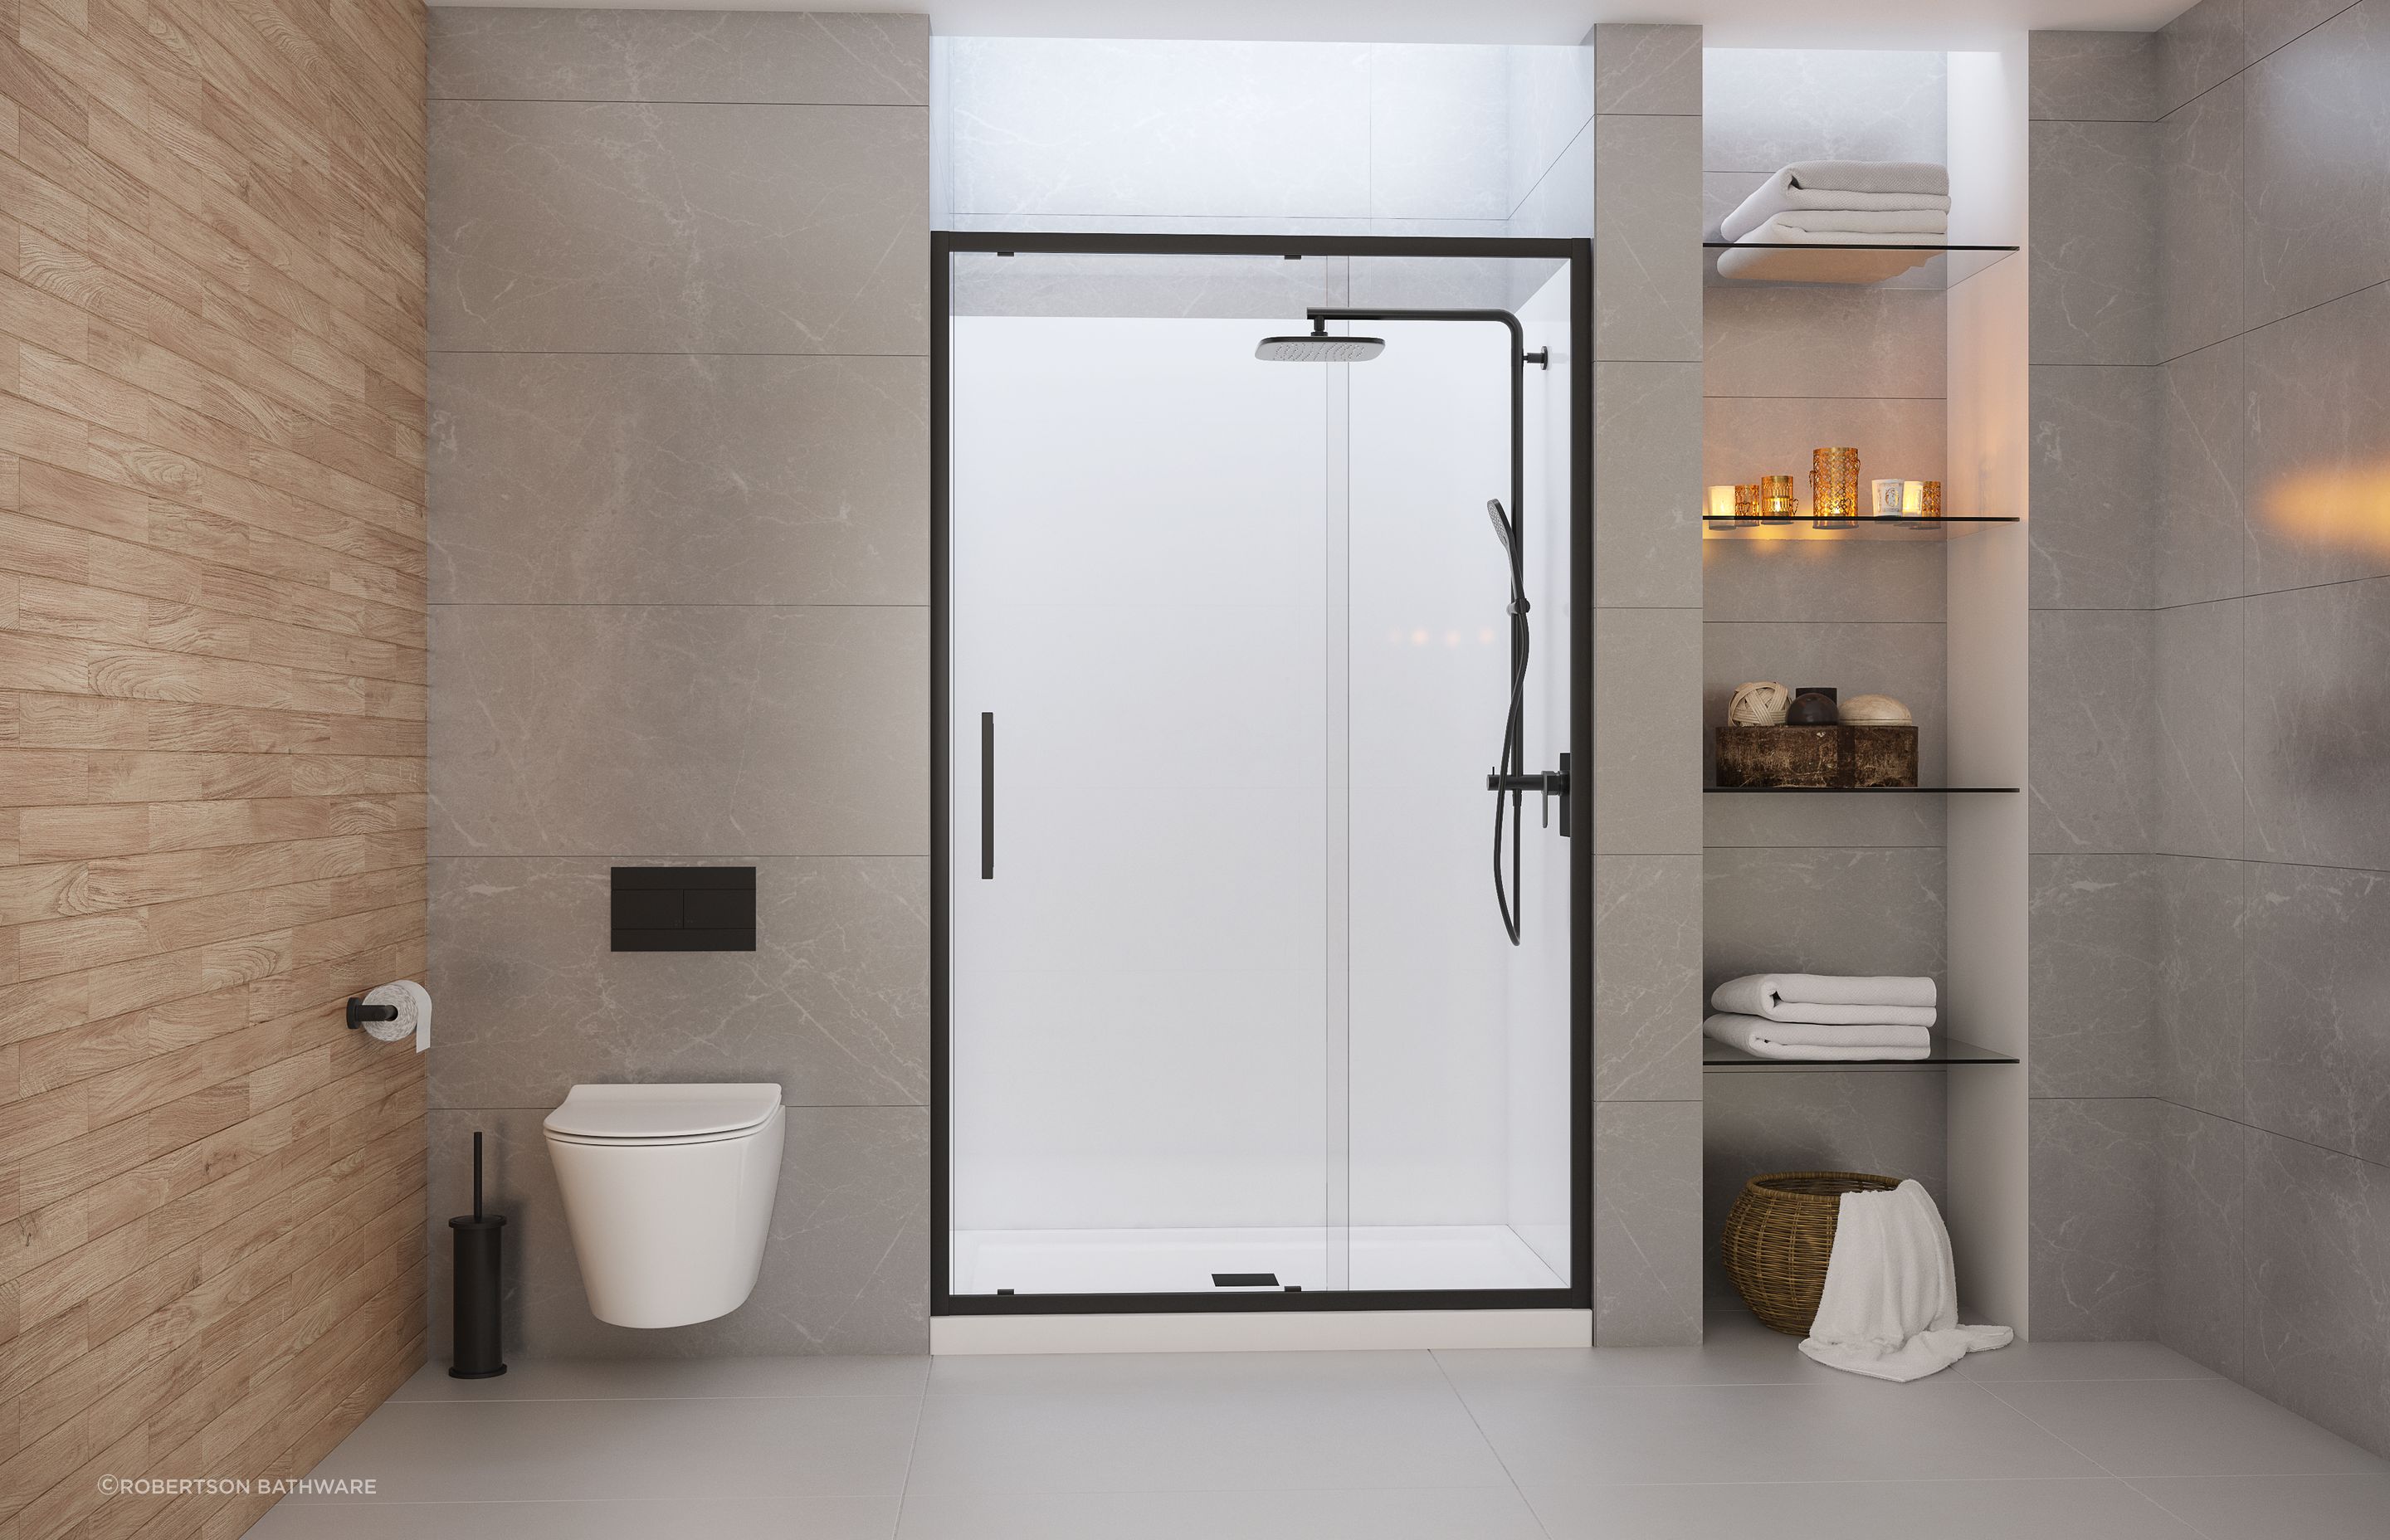 The European minimalist design of Evolve features a smooth flat profile tray, integrated square waste and premium fittings for a luxurious shower experience